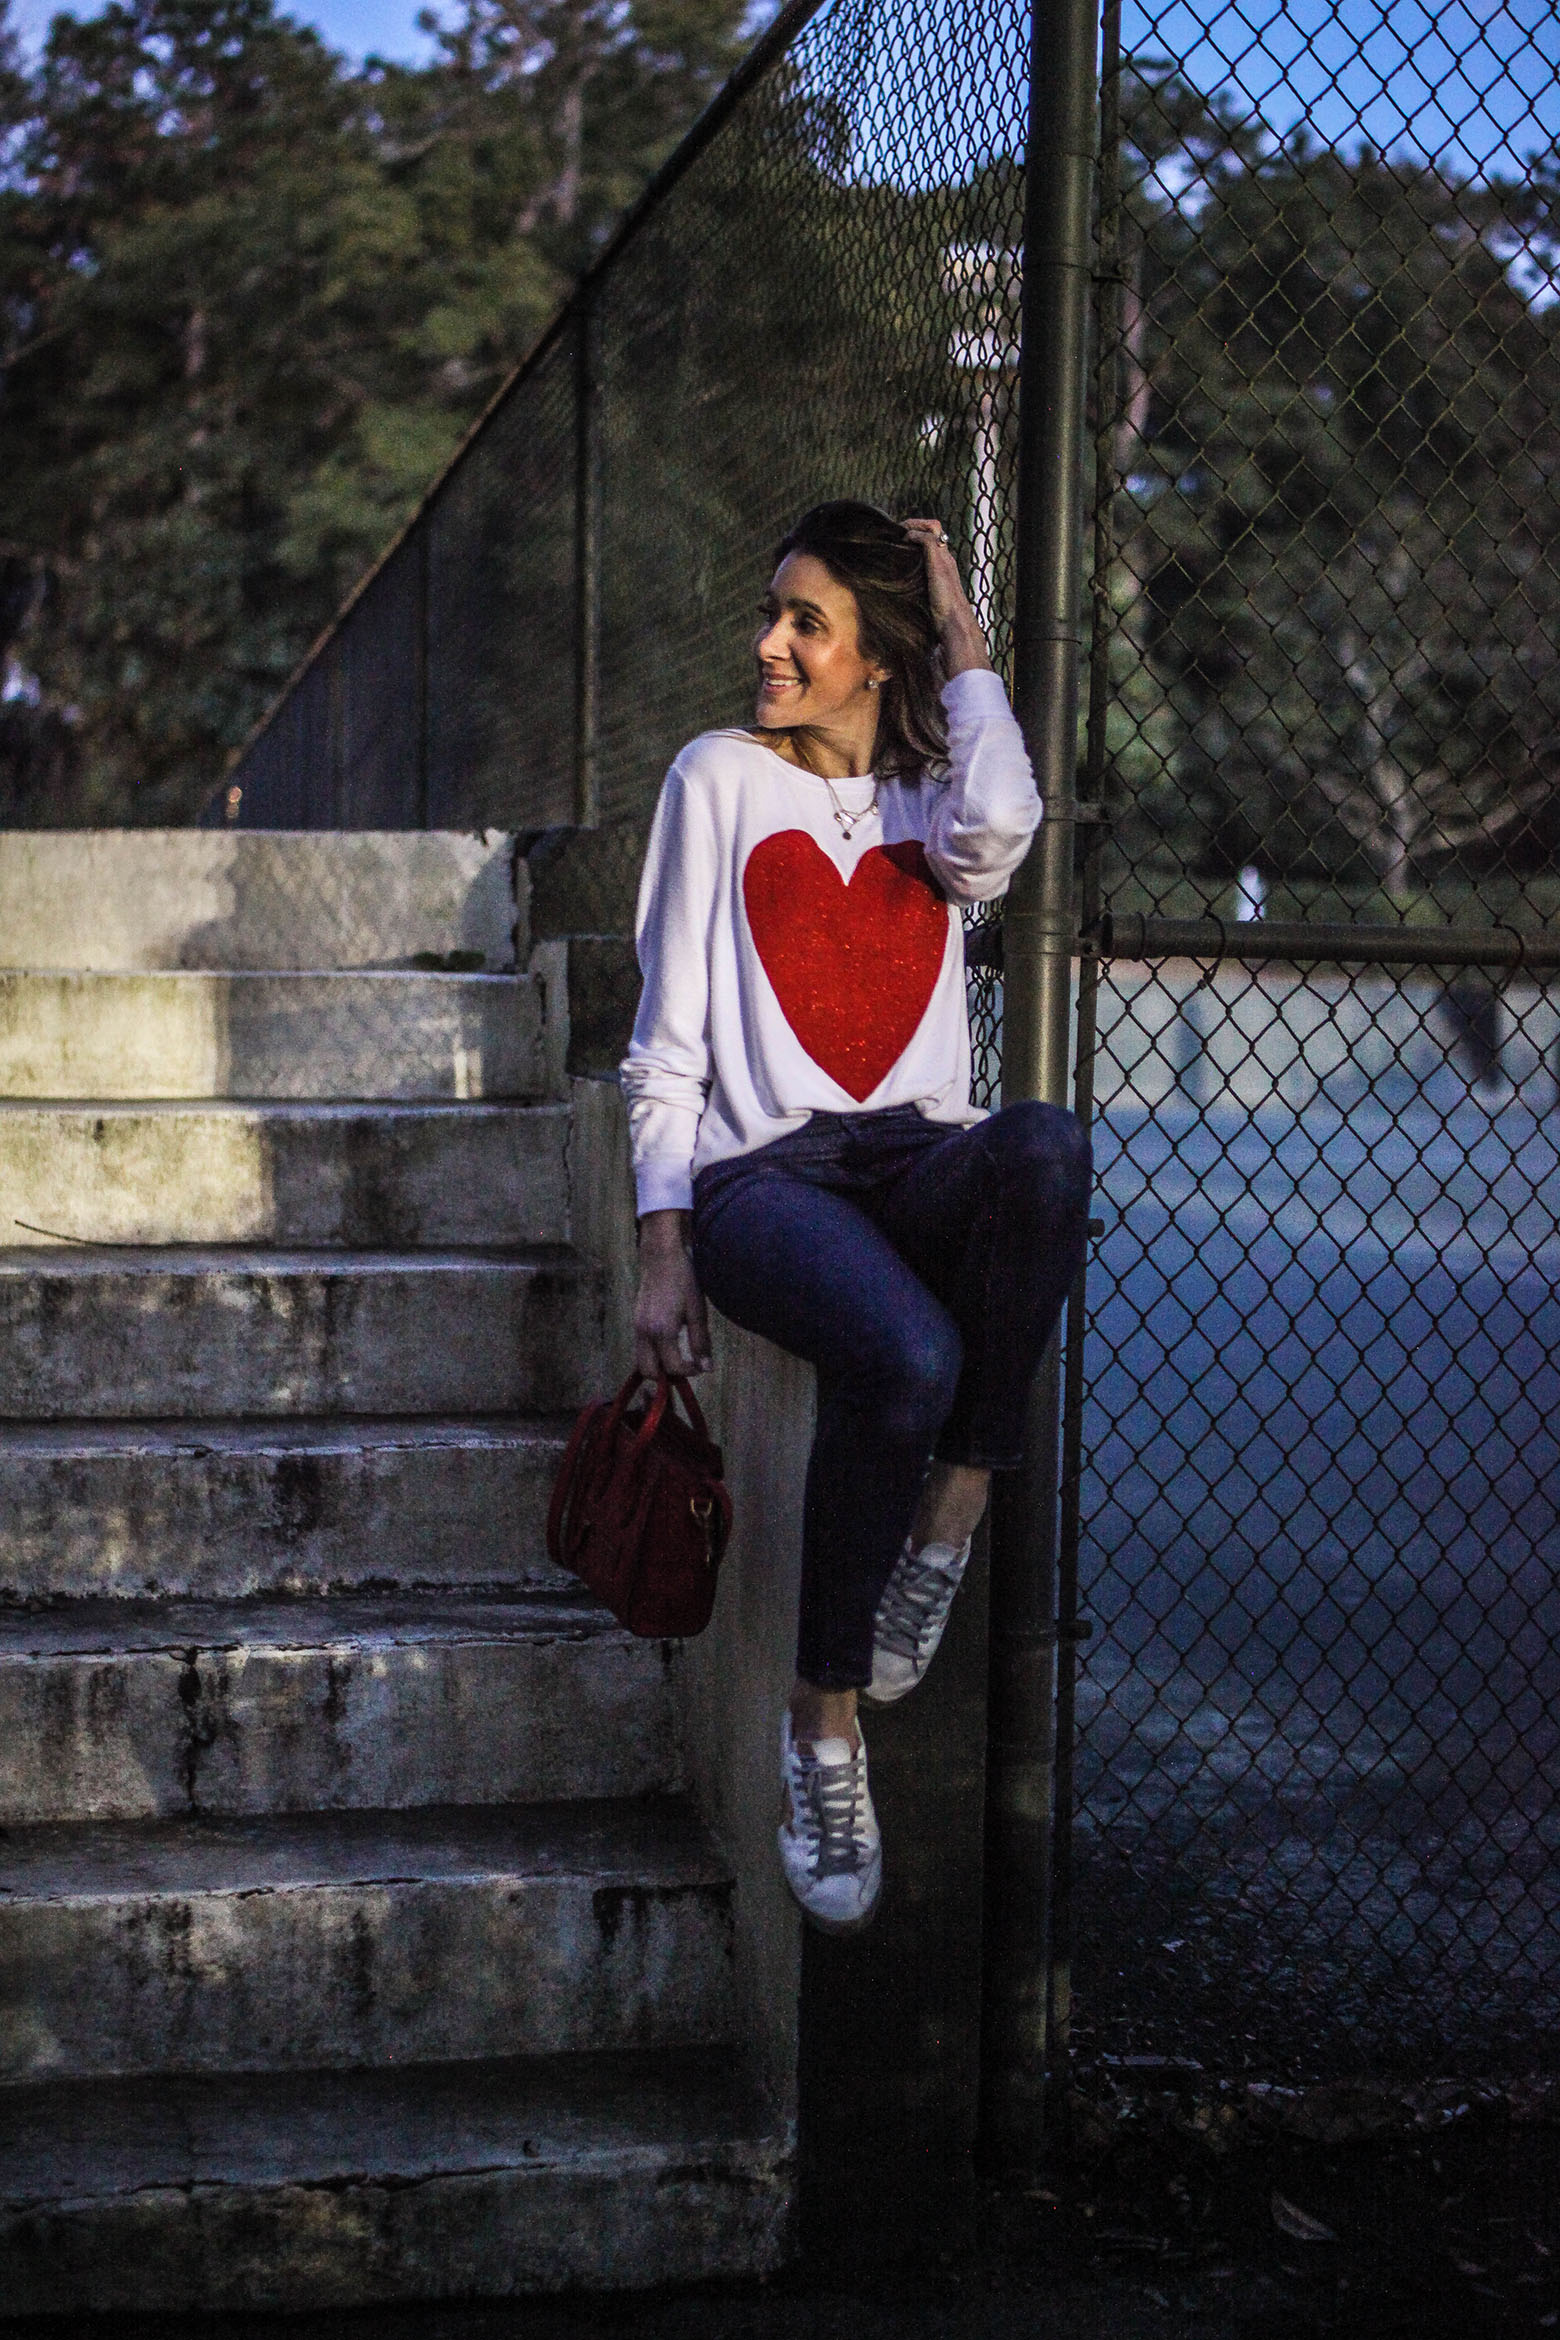  HEART SWEATSHIRT - WILDFOX - ON SALE HERE - | JEANS - HERE | SNEAKERS - DUPE VERSION HERE | HANDBAG - CELINE - HERE - DUPE VERSION - HERE 